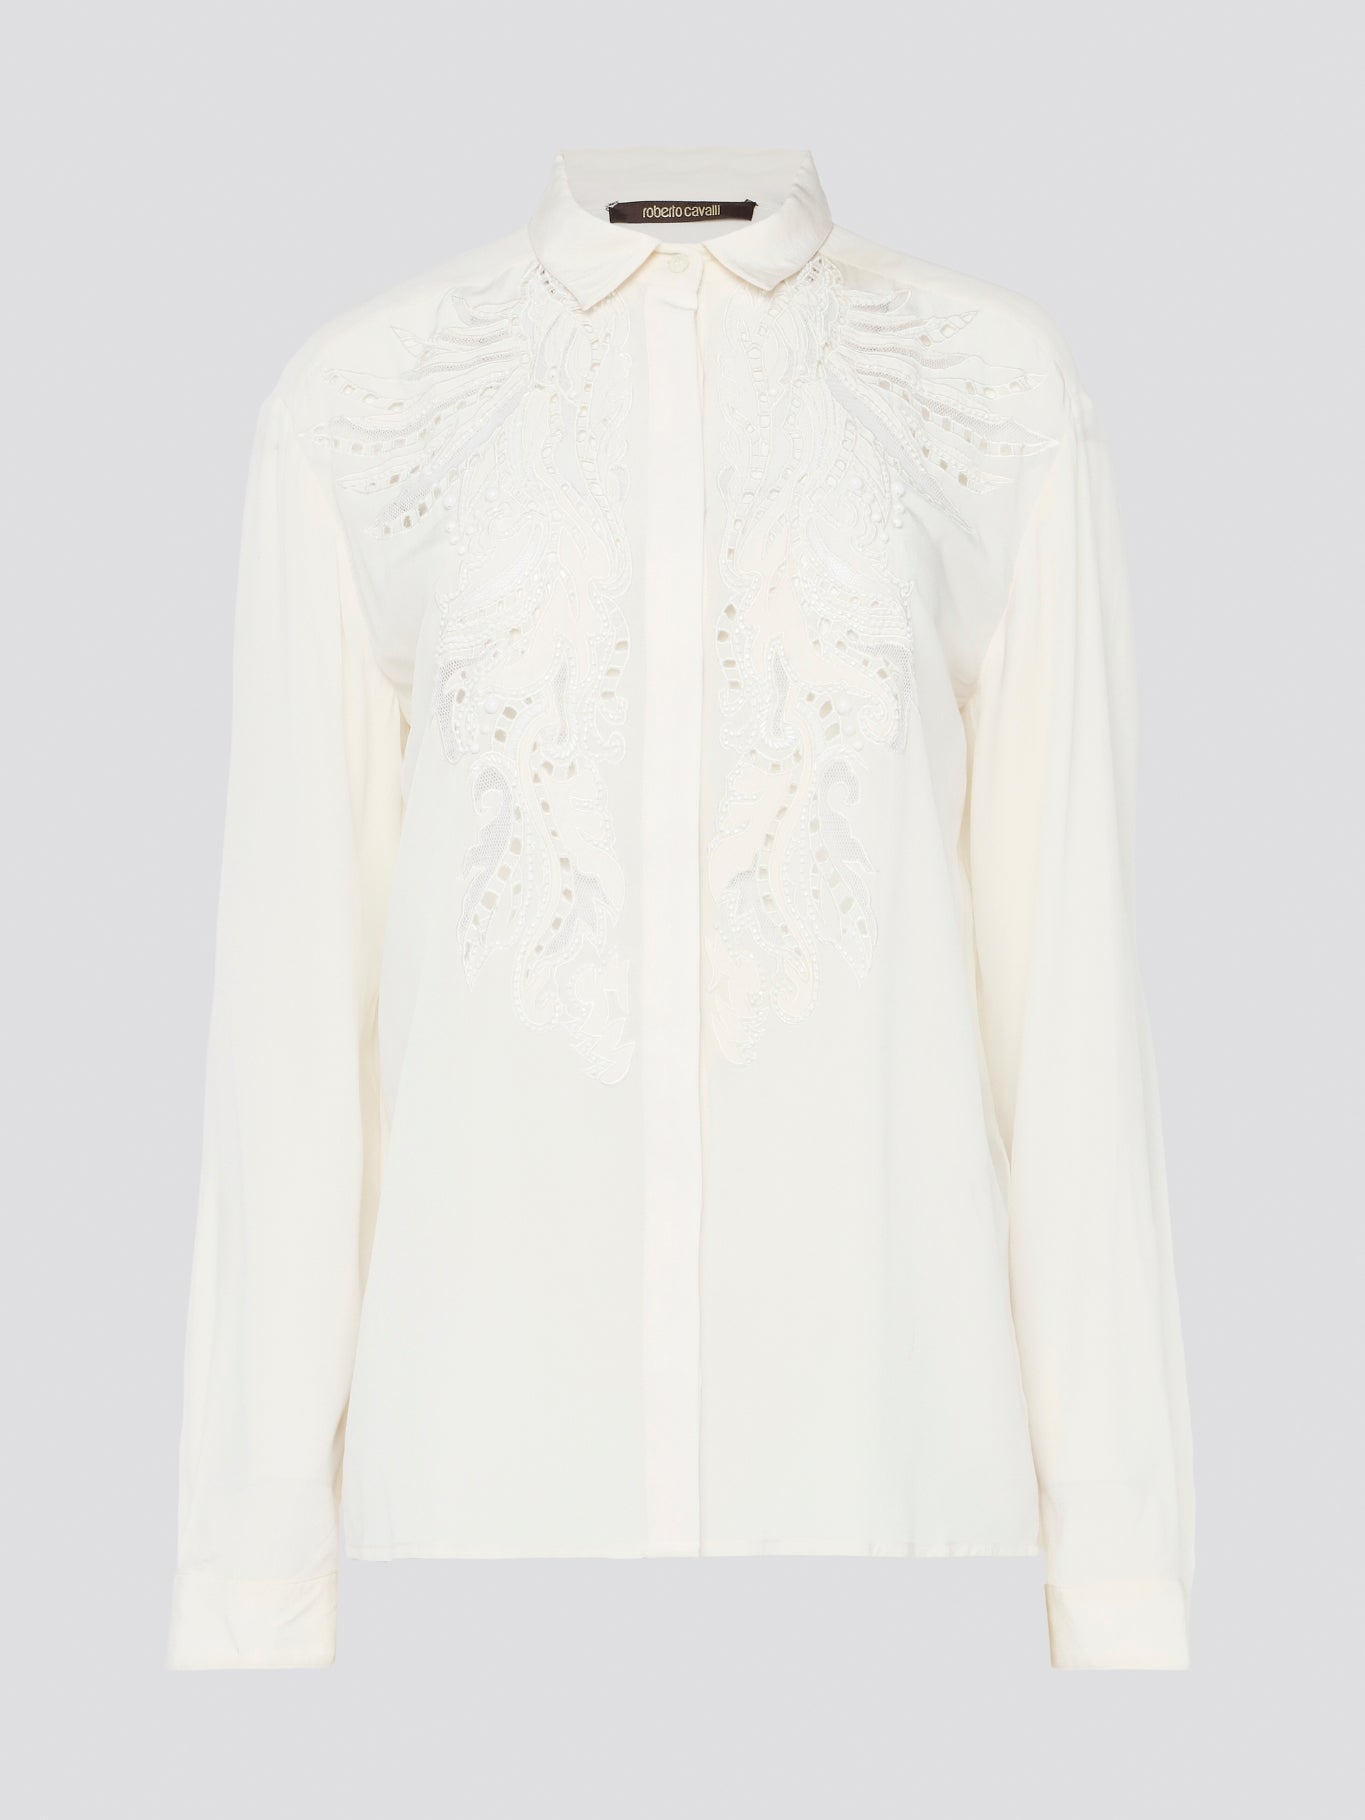 Feel like a bohemian queen in this exquisite white embroidered long sleeve blouse from Roberto Cavalli. The intricate detailing and luxurious fabric create a stunning and timeless piece that is perfect for any occasion. Elevate your wardrobe and make a statement with this elegant and unique blouse.